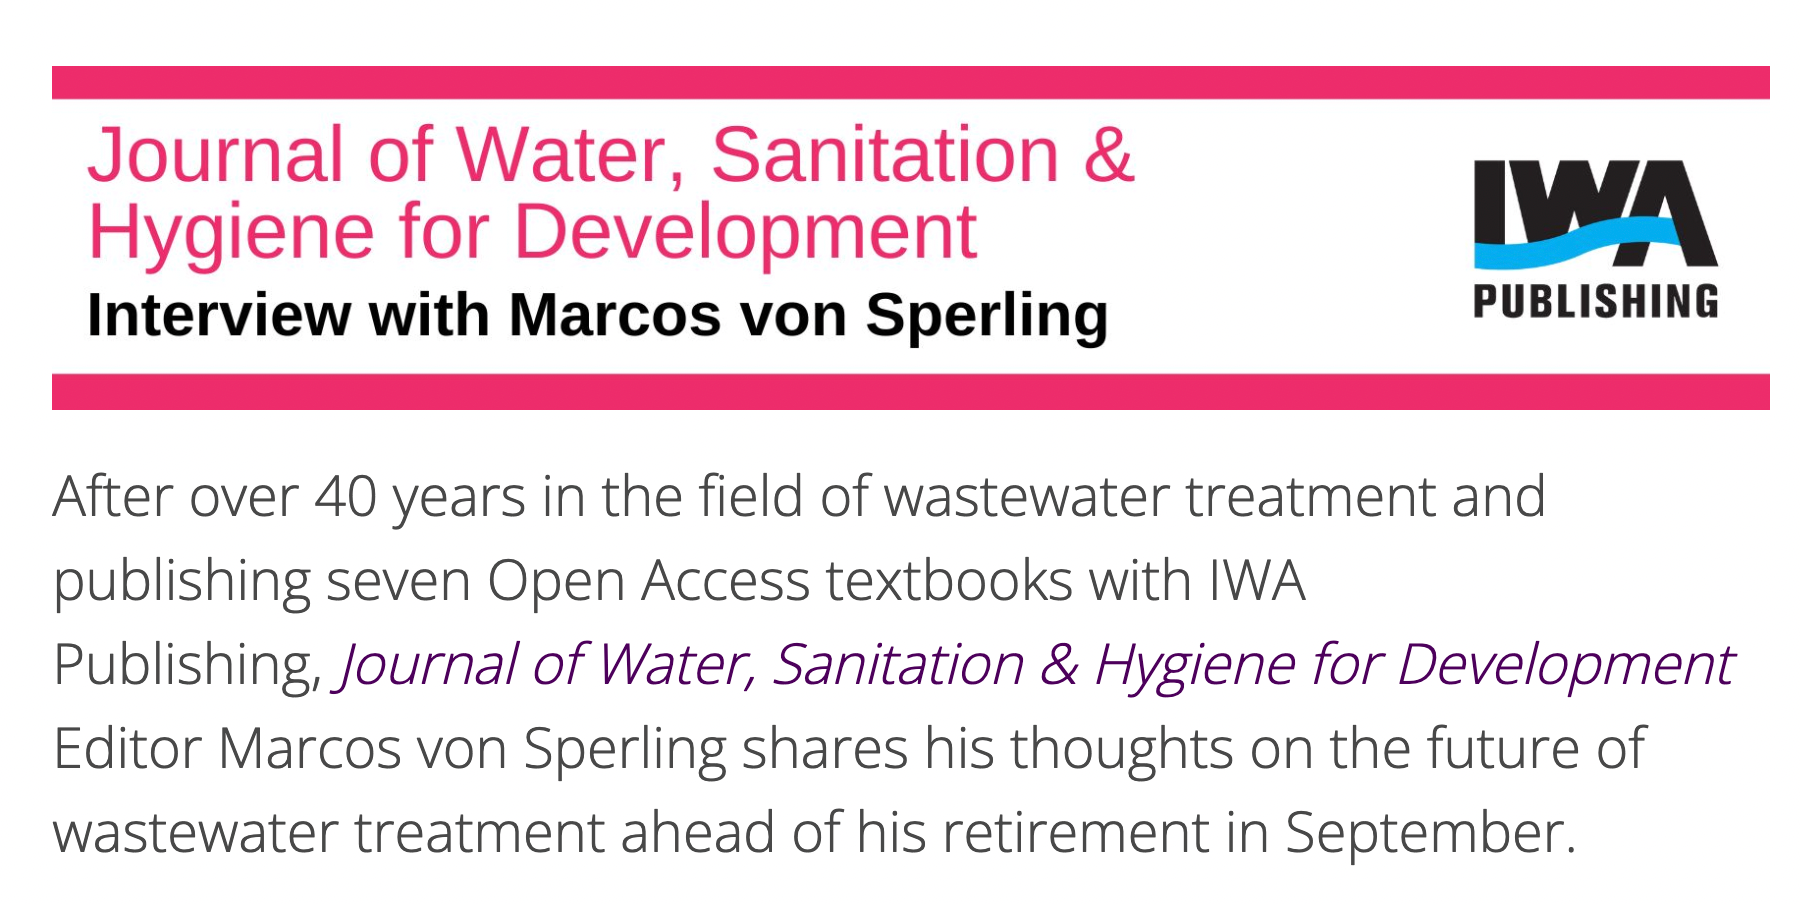 Water, Sanitation & Hygiene Editor shares his thoughts on the future of wastewater treatment